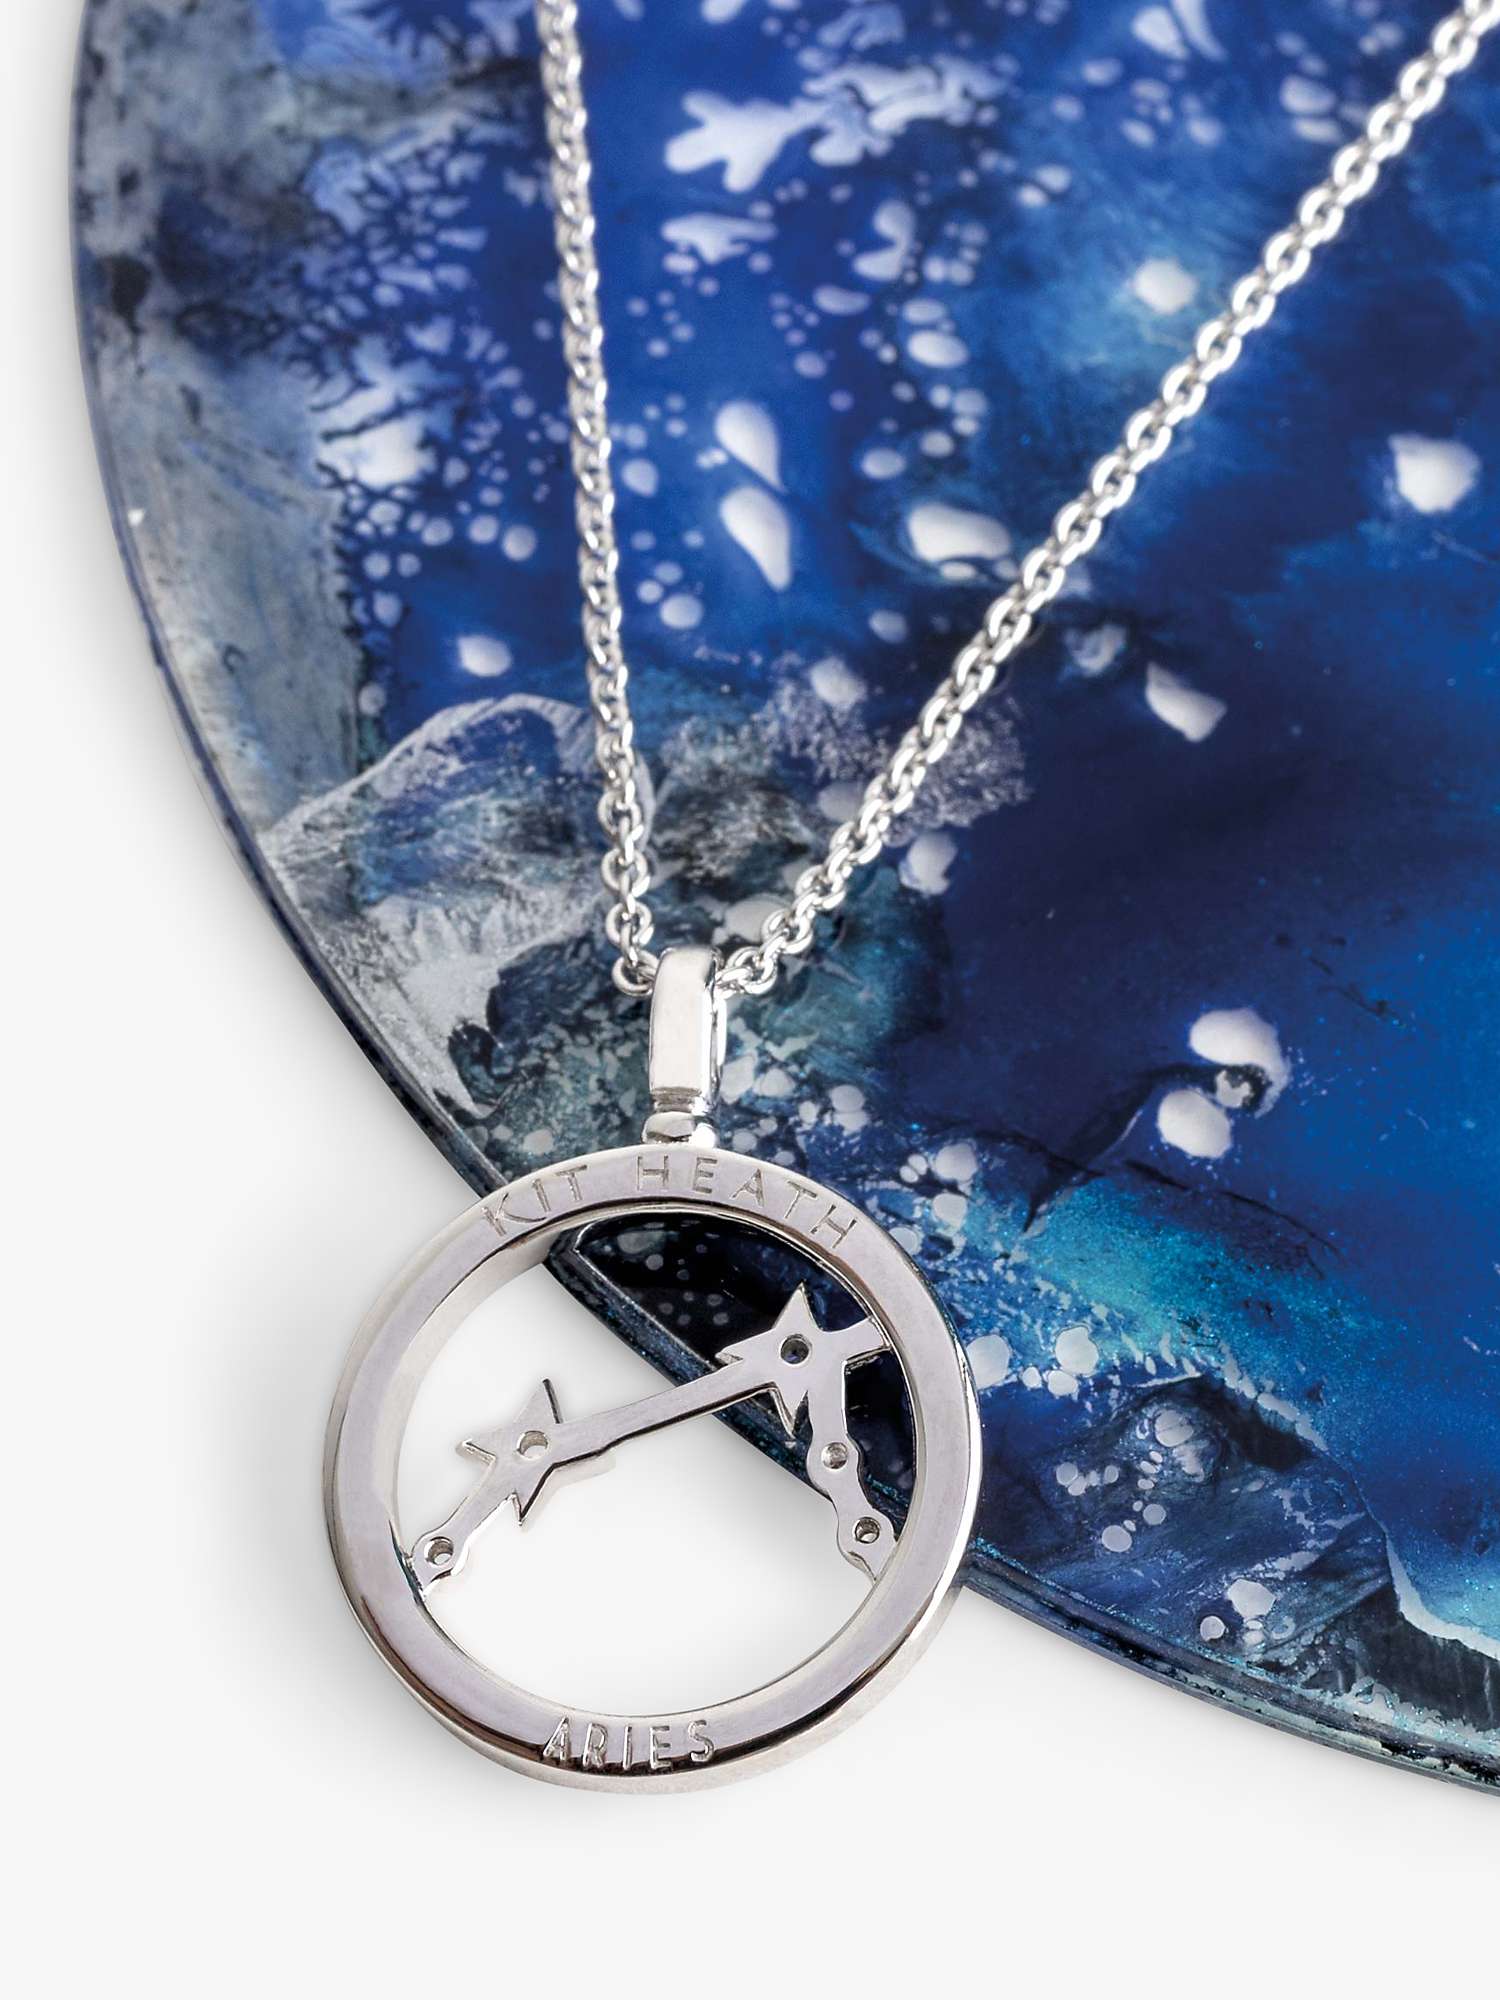 Buy Kit Heath Aries Constellation Pendant Necklace, Silver Online at johnlewis.com